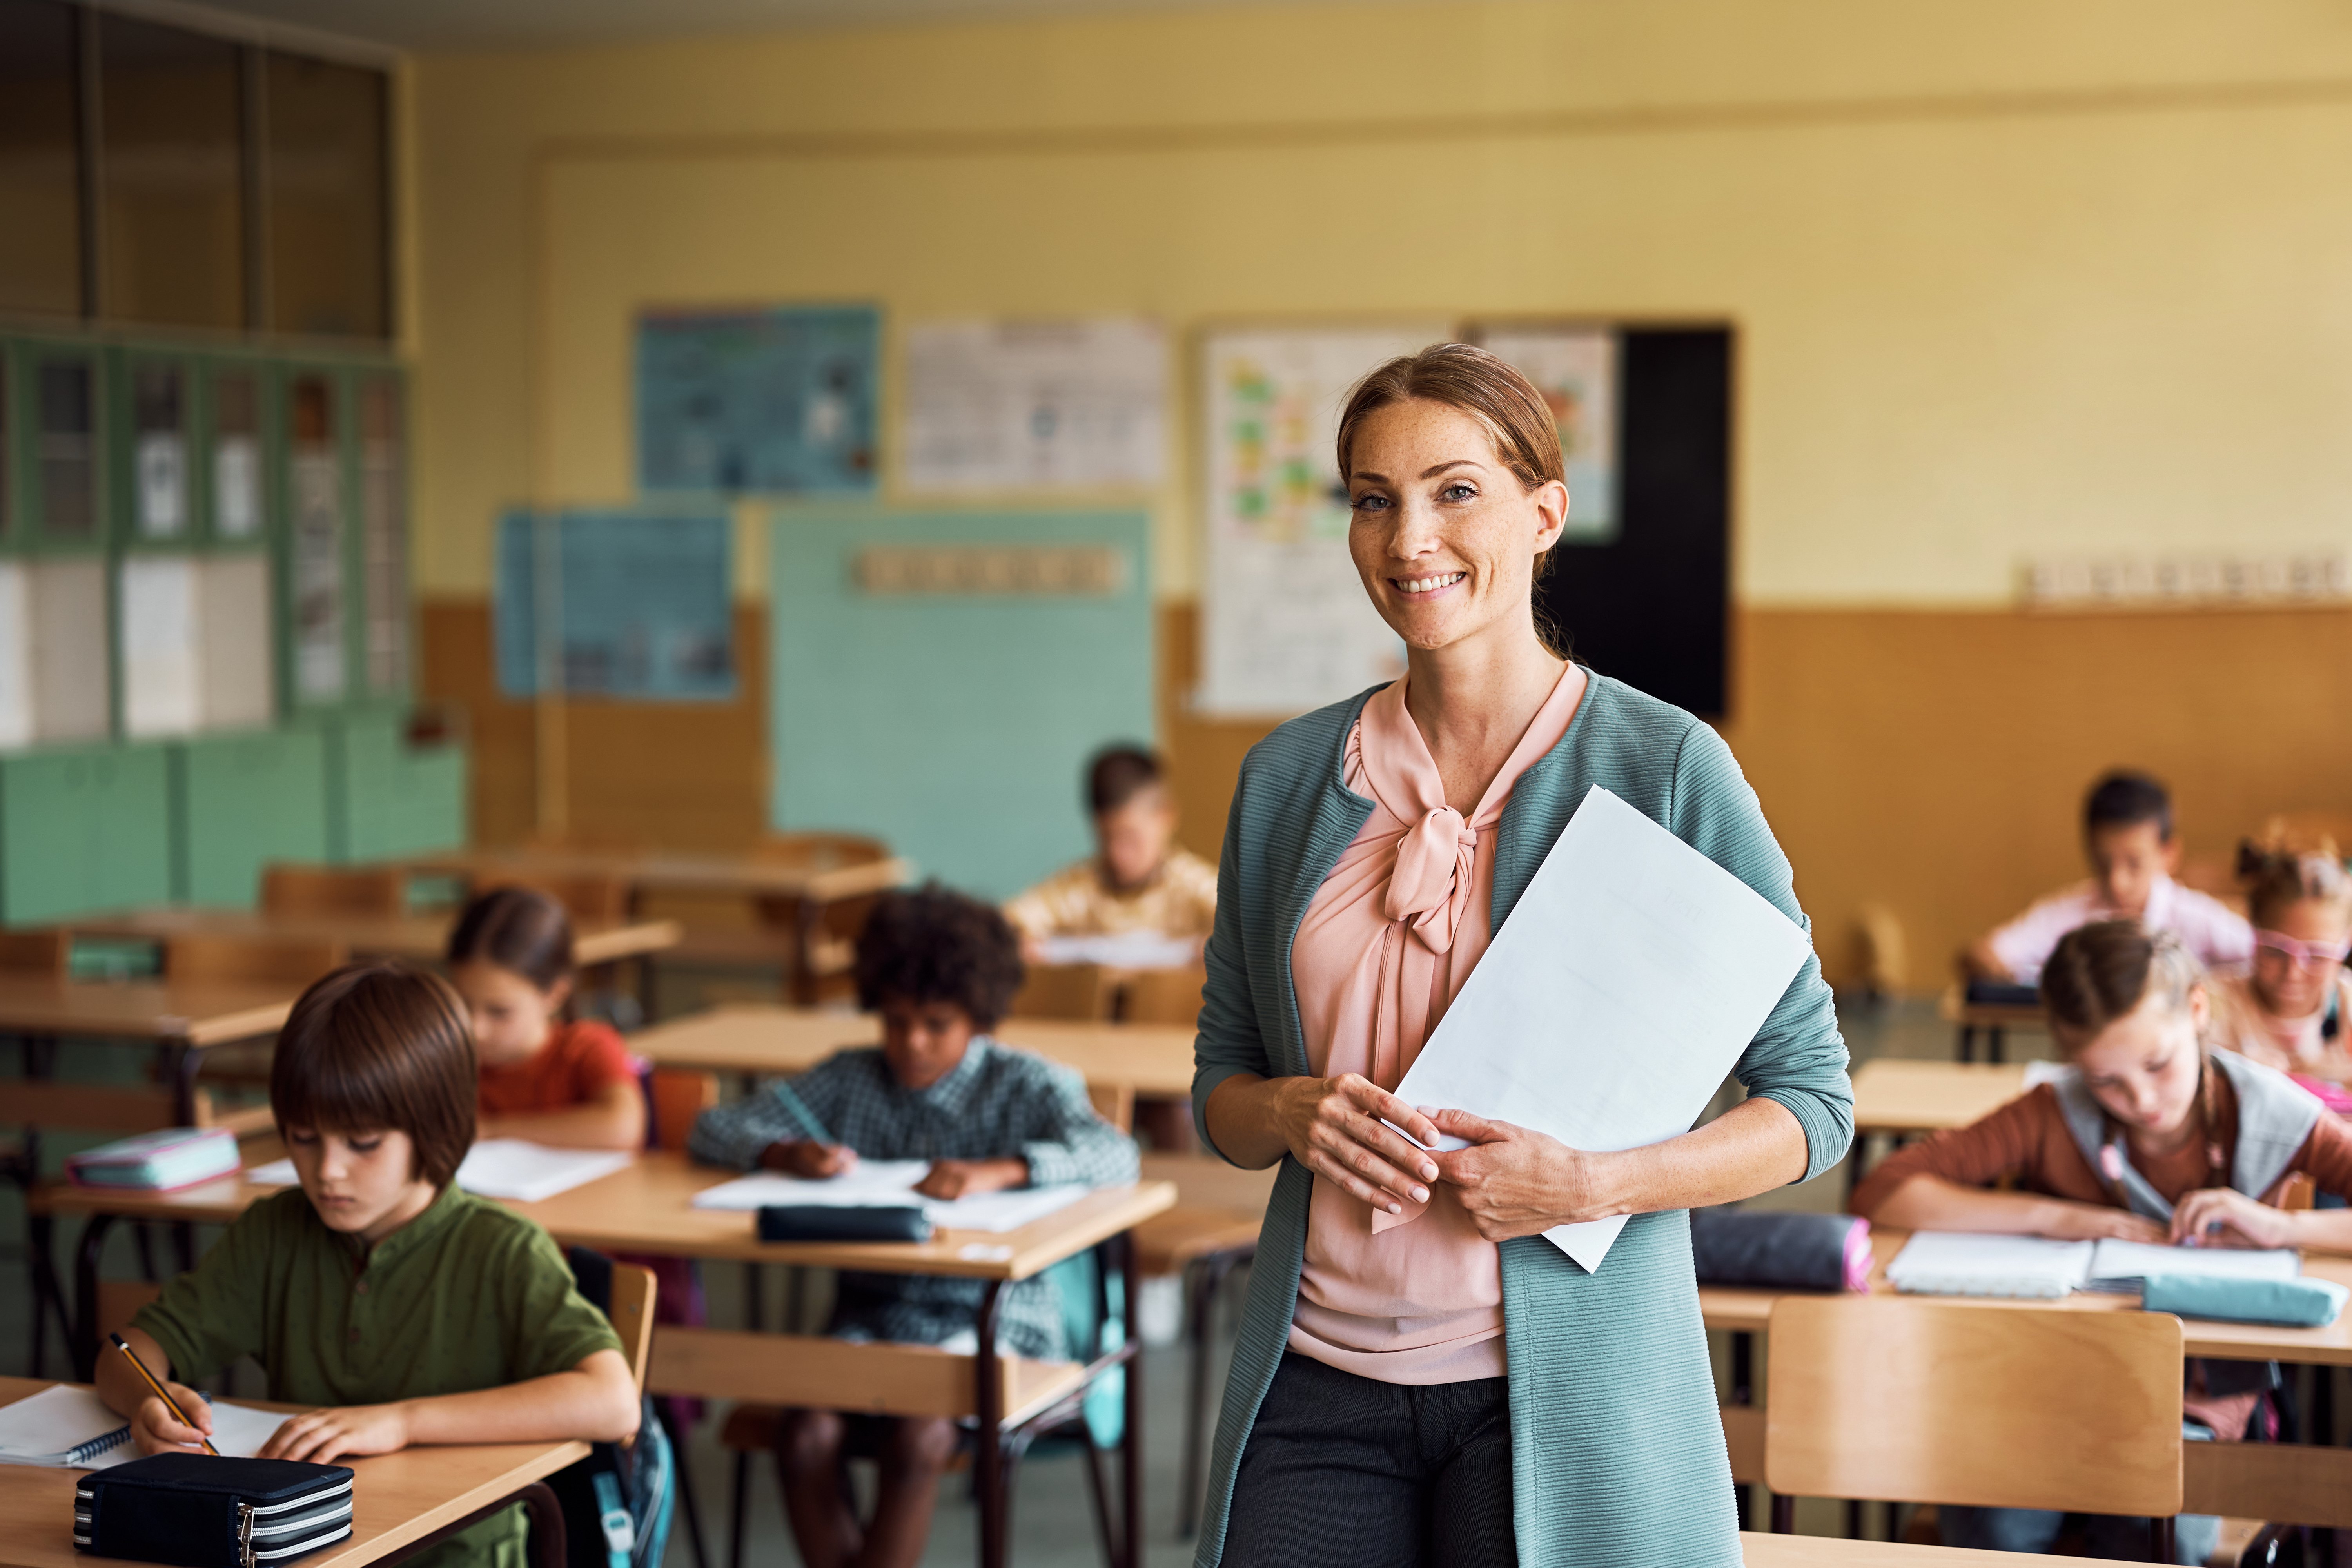 Elementary school teacher standing in classroom smiling at camera